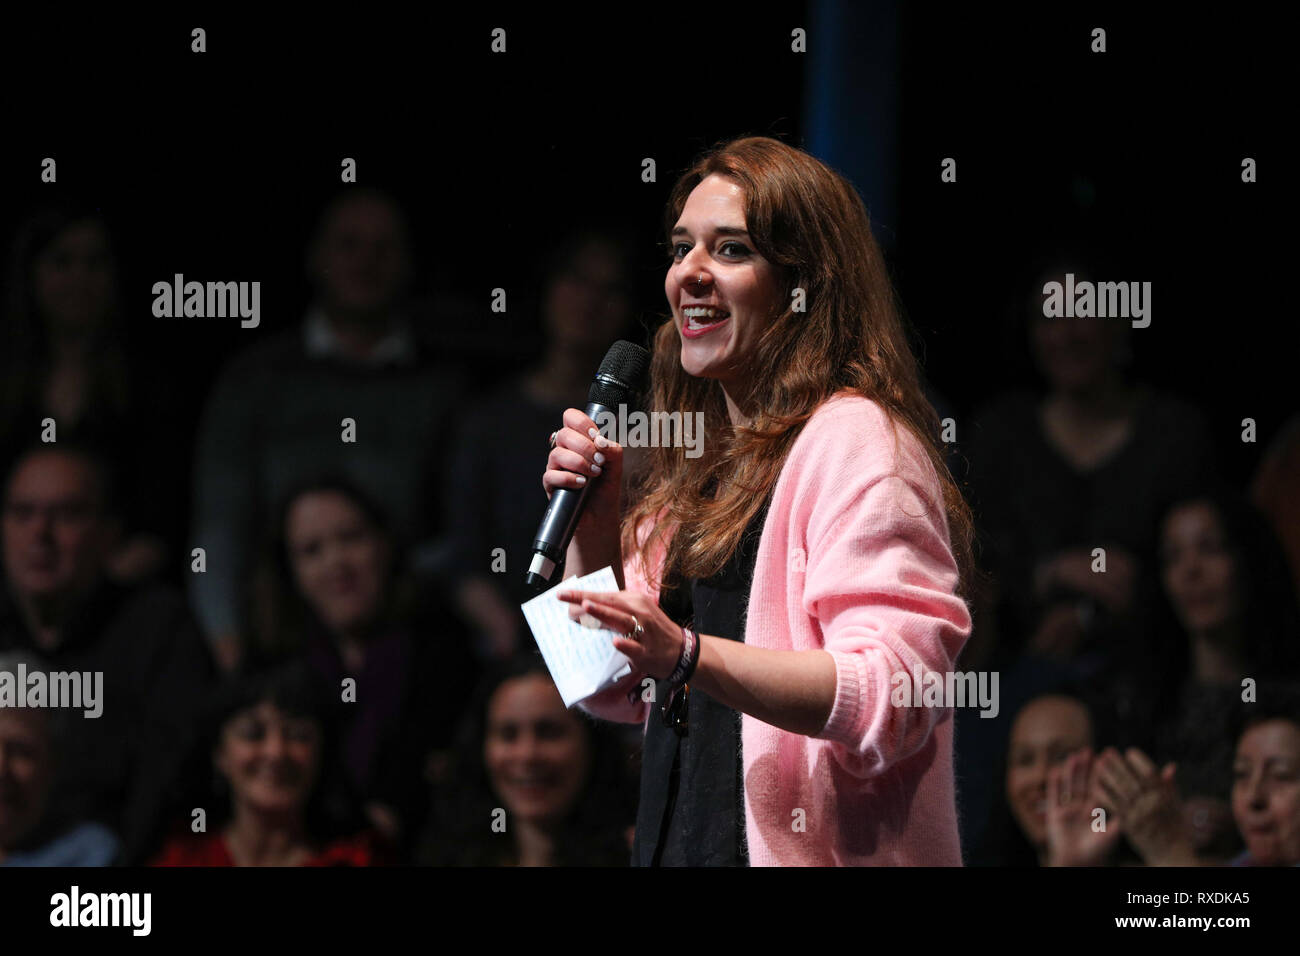 Madrid, Spain. 09th March, 2019.Noelia Vera seen speaking at the closing of the event #PodemosEnMarcha2019 Credit: Jesús Hellin/Alamy Live News Stock Photo